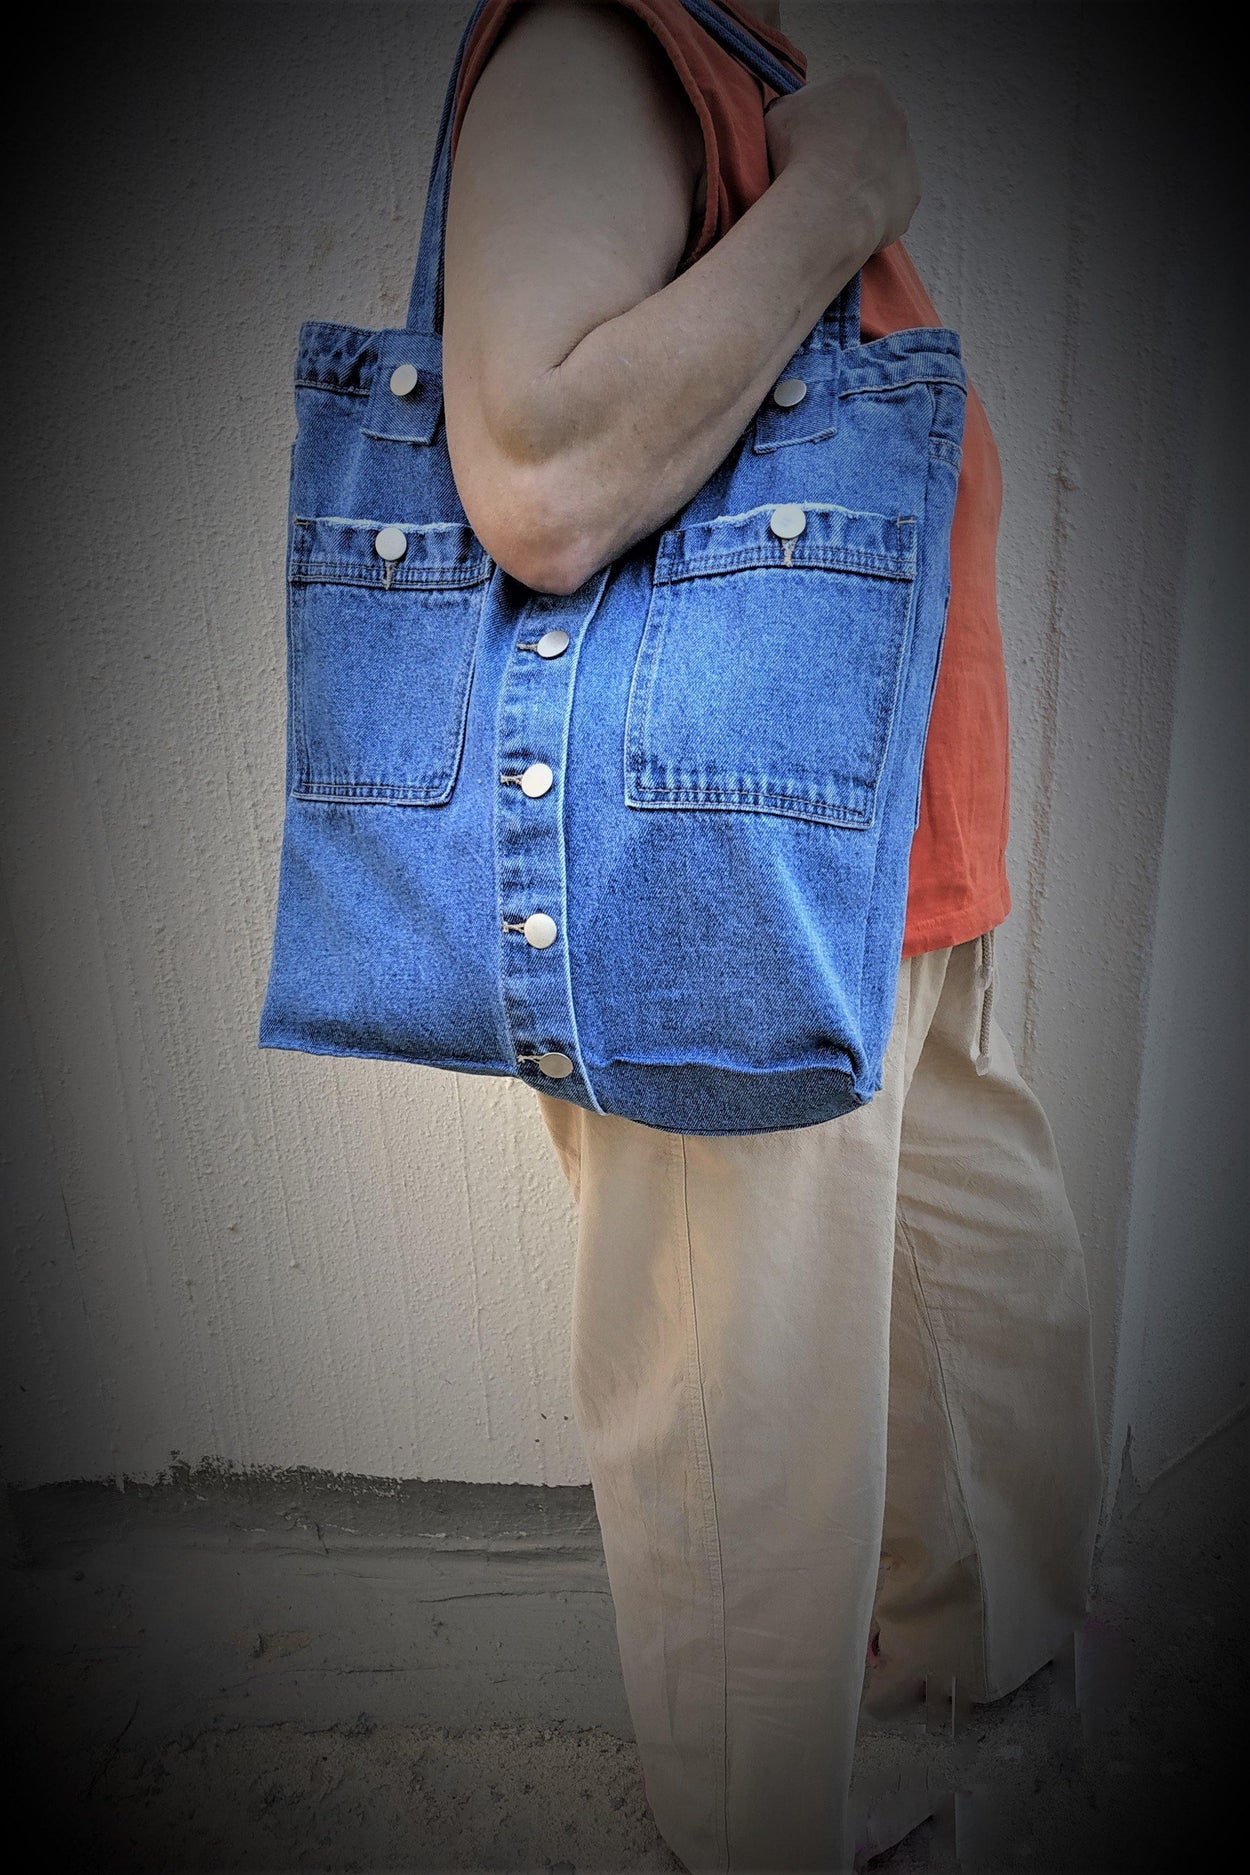 Denim tote bag with two outer and two inner pockets - GLEZANT designer goods store. 